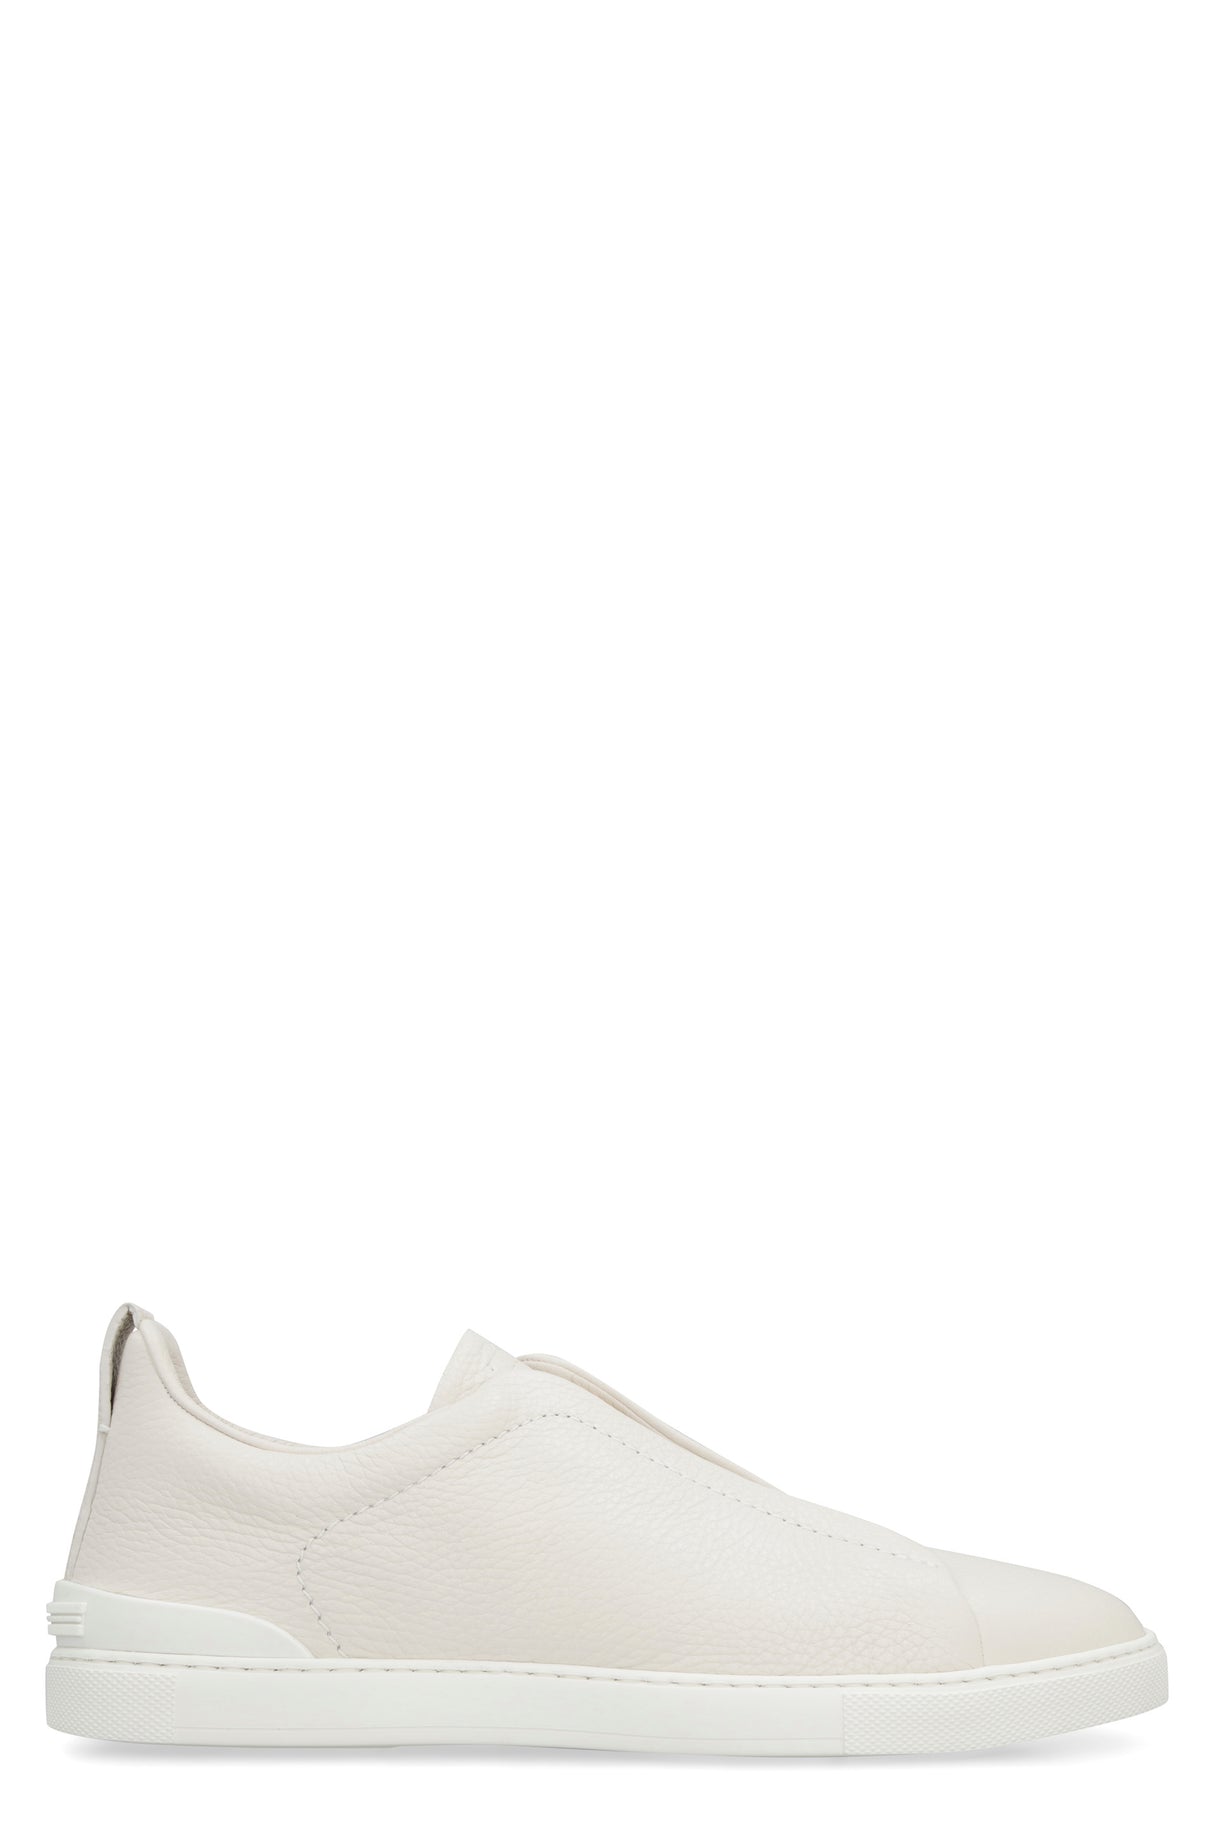 ZEGNA Men's White Triple Stitch Leather Sneaker for a Stylish and Comfortable Look